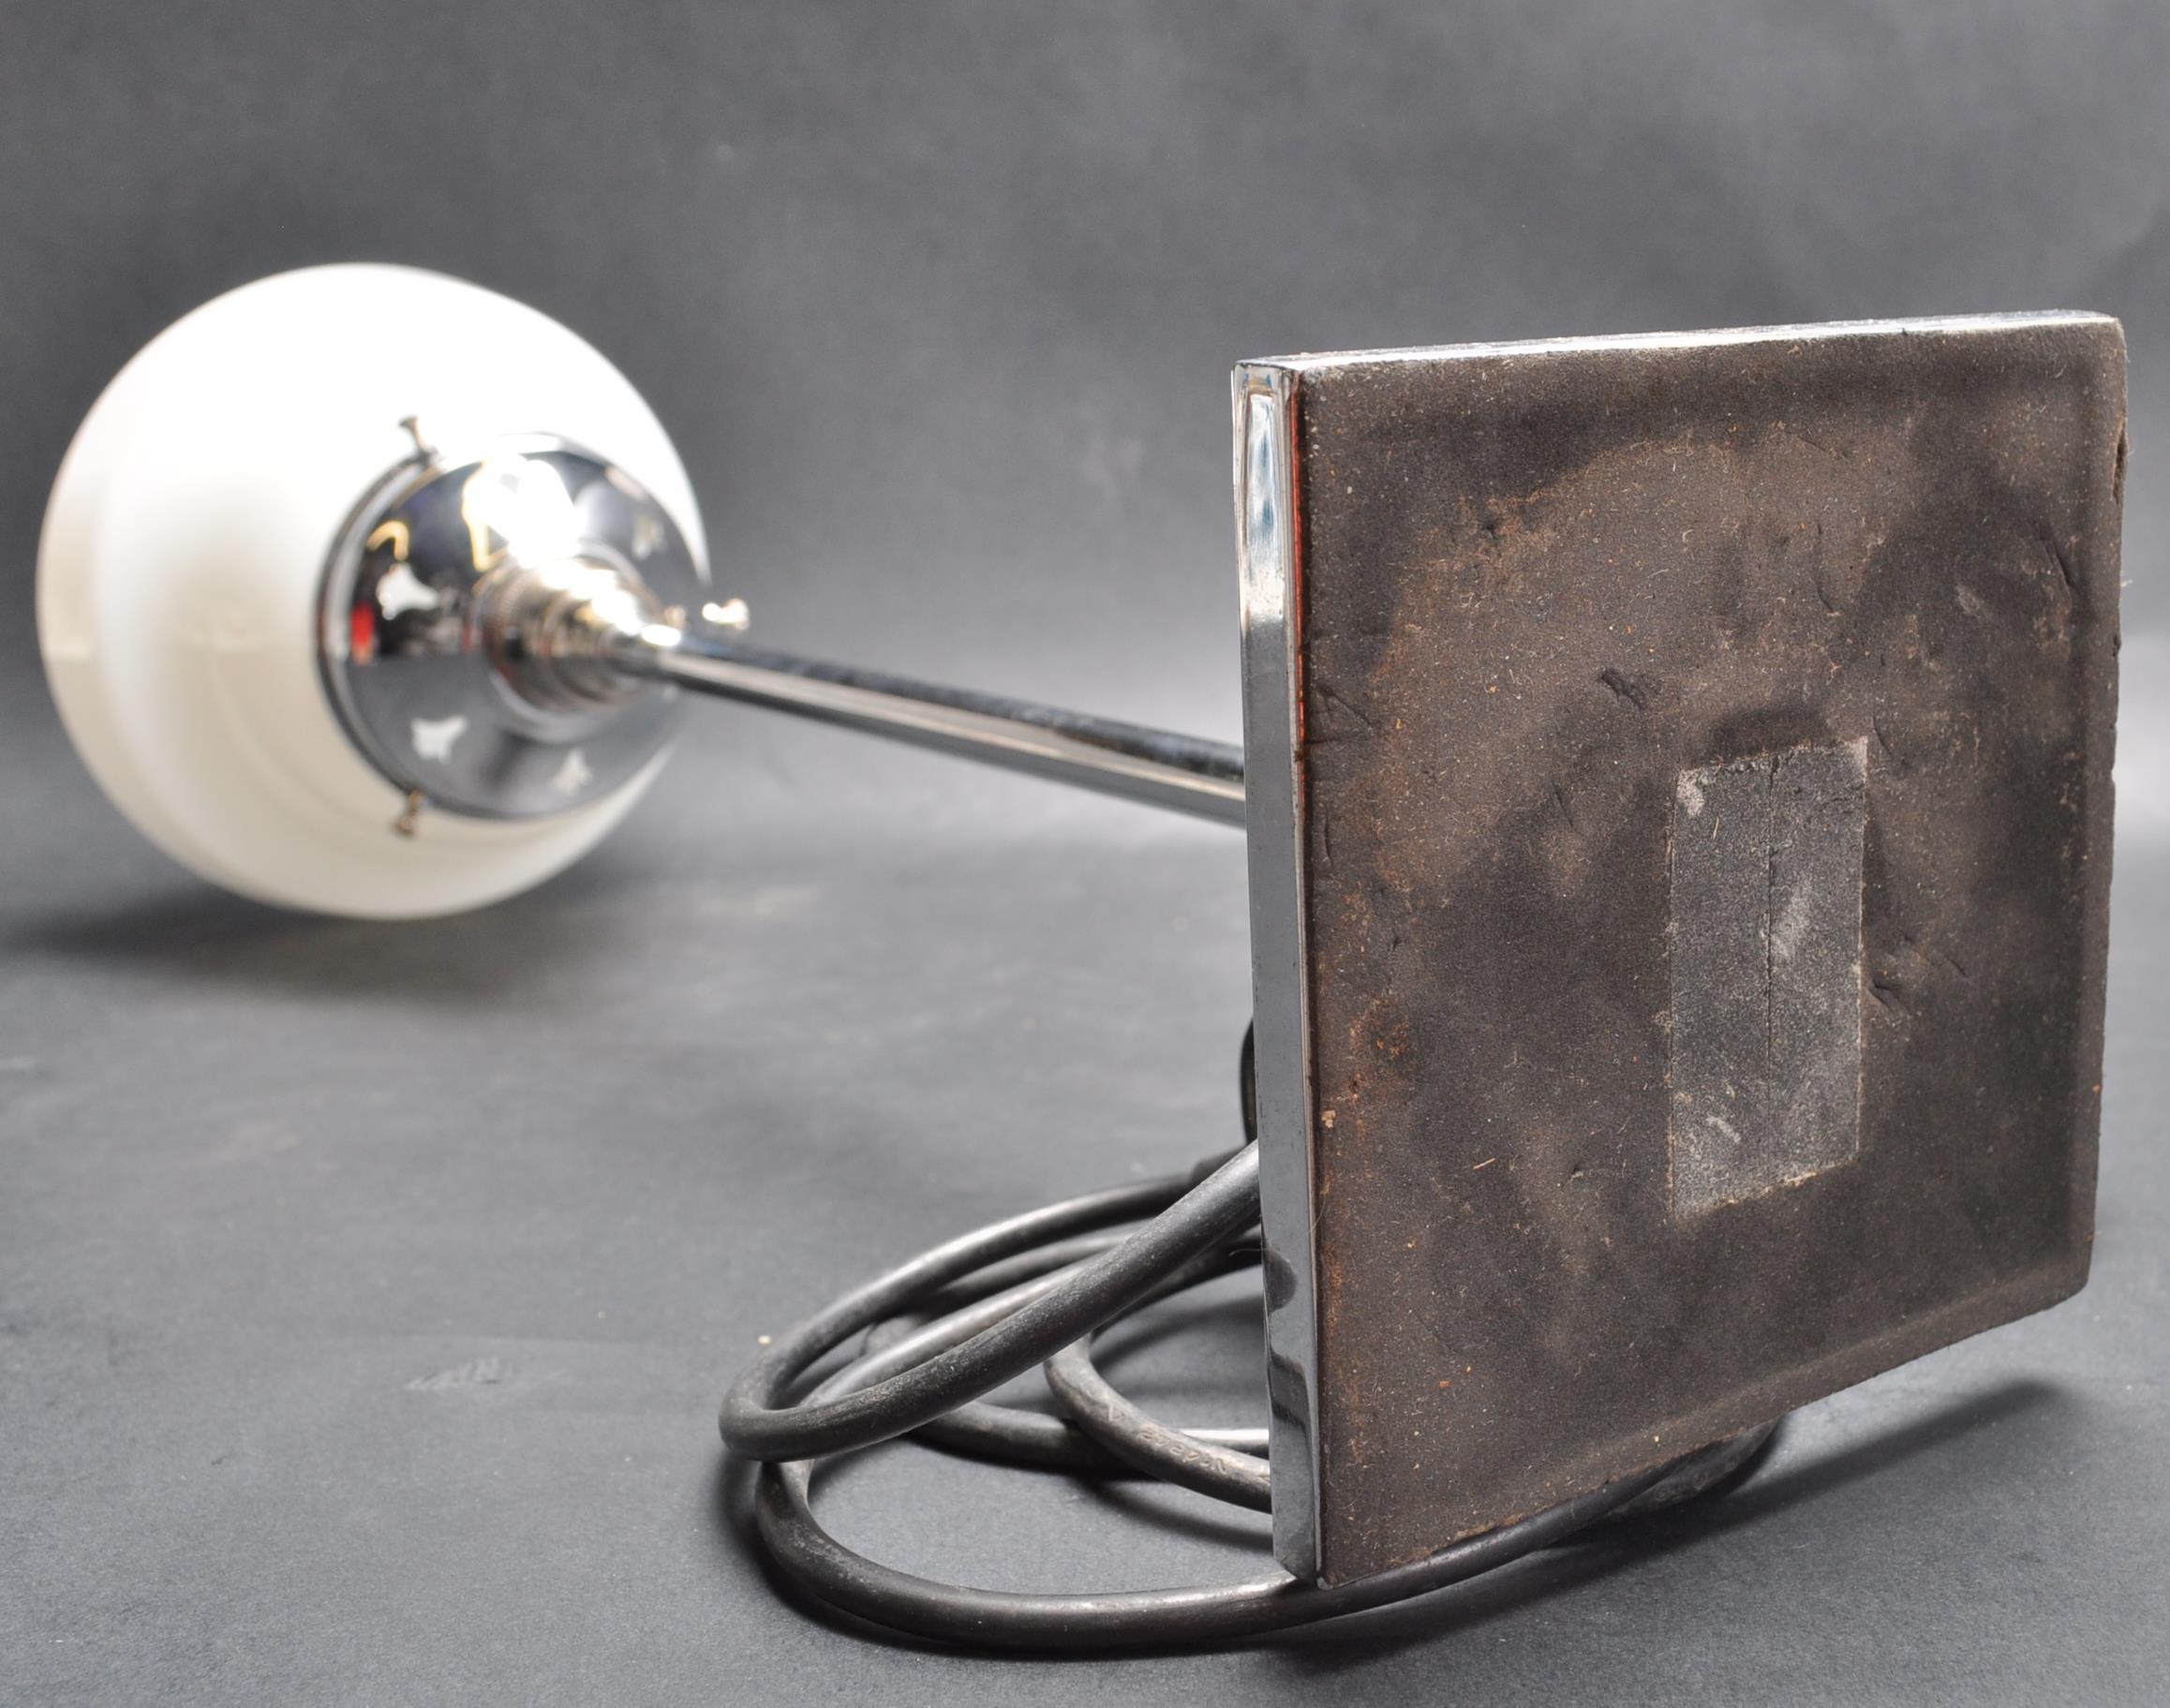 ART DECO STAYLE TABLE LAMP / TABLE LIGHT - Image 6 of 6